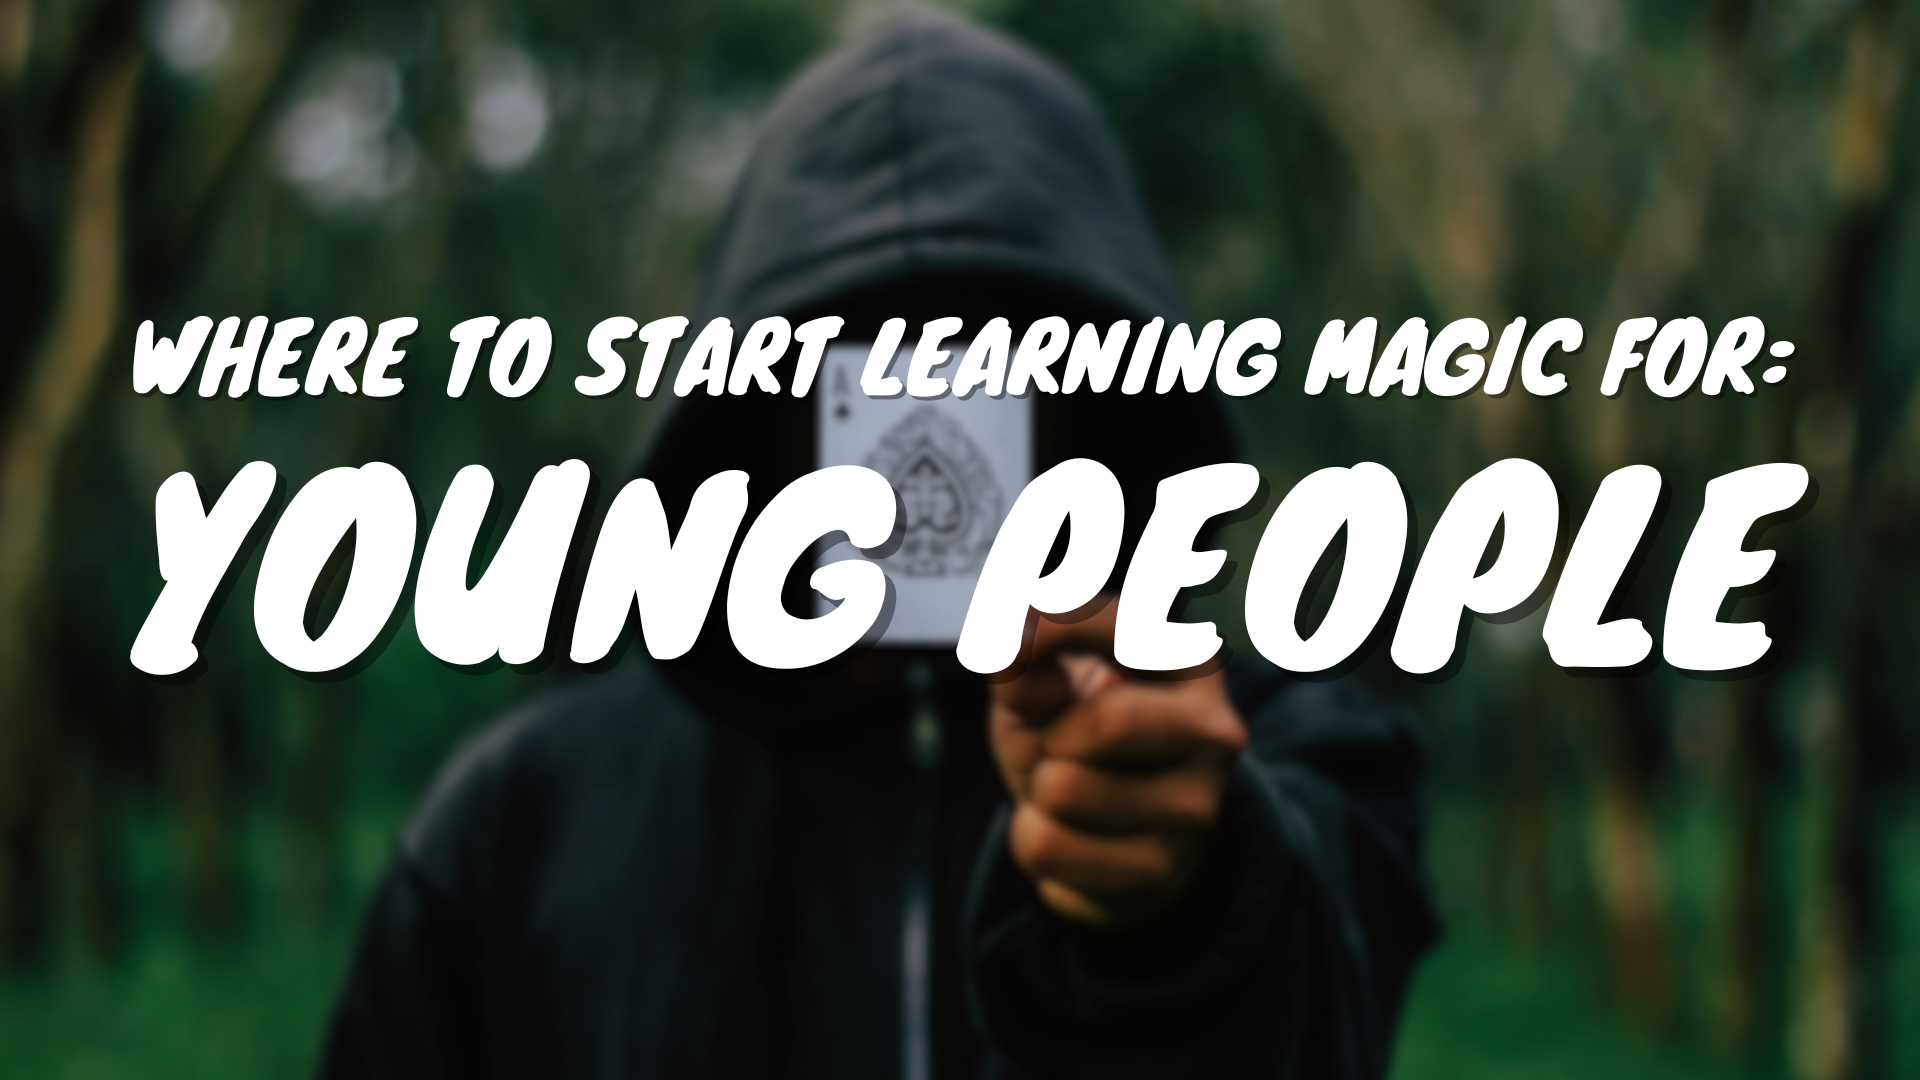 Where To Start Learning Magic For: Young People